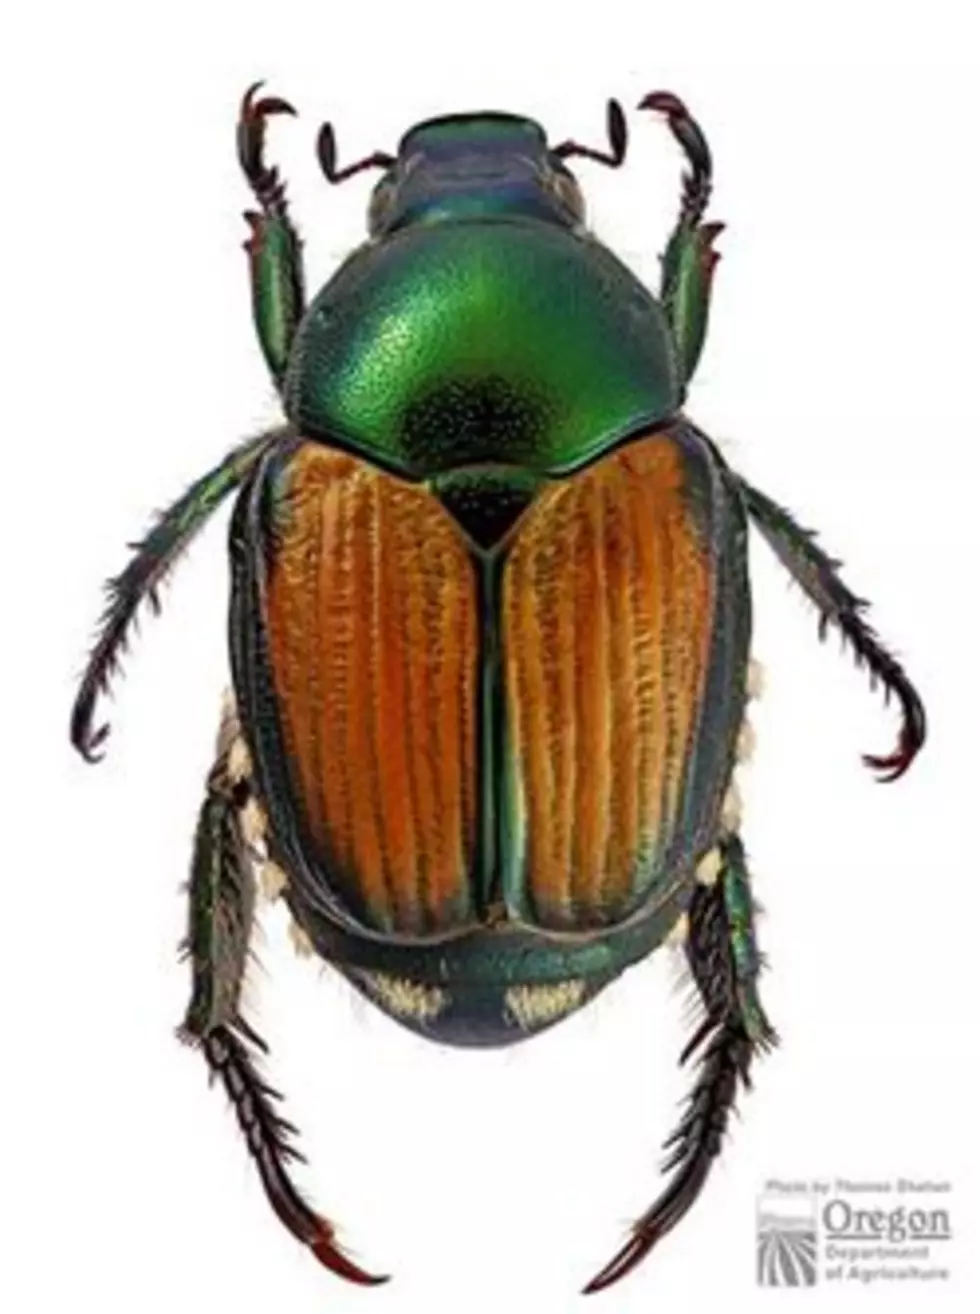 So it Begins: WA Ag Officials Catch Summer’s First Pair of Japanese Beetles in Grandview